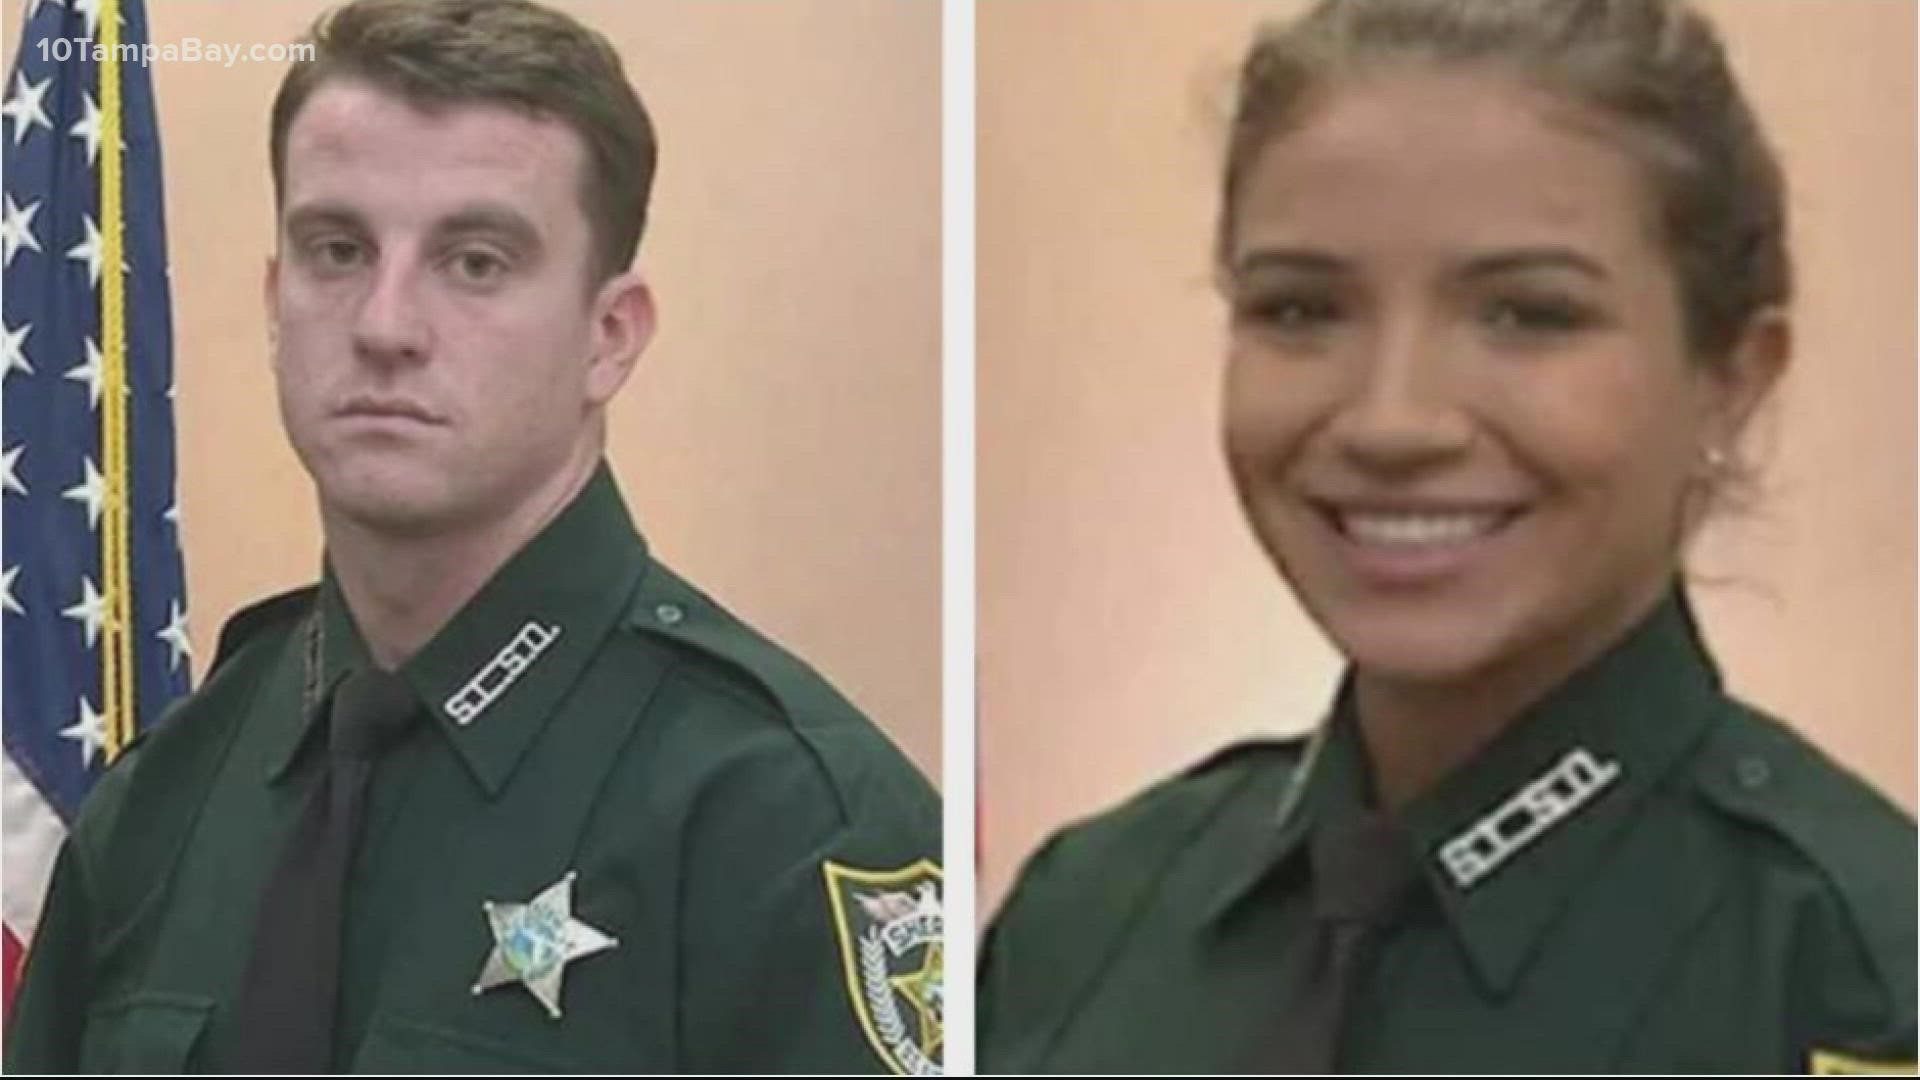 Two days after the death of Deputy Clayton Osteen, the sheriff's office says they learned about the death of Deputy Victoria Pacheco.